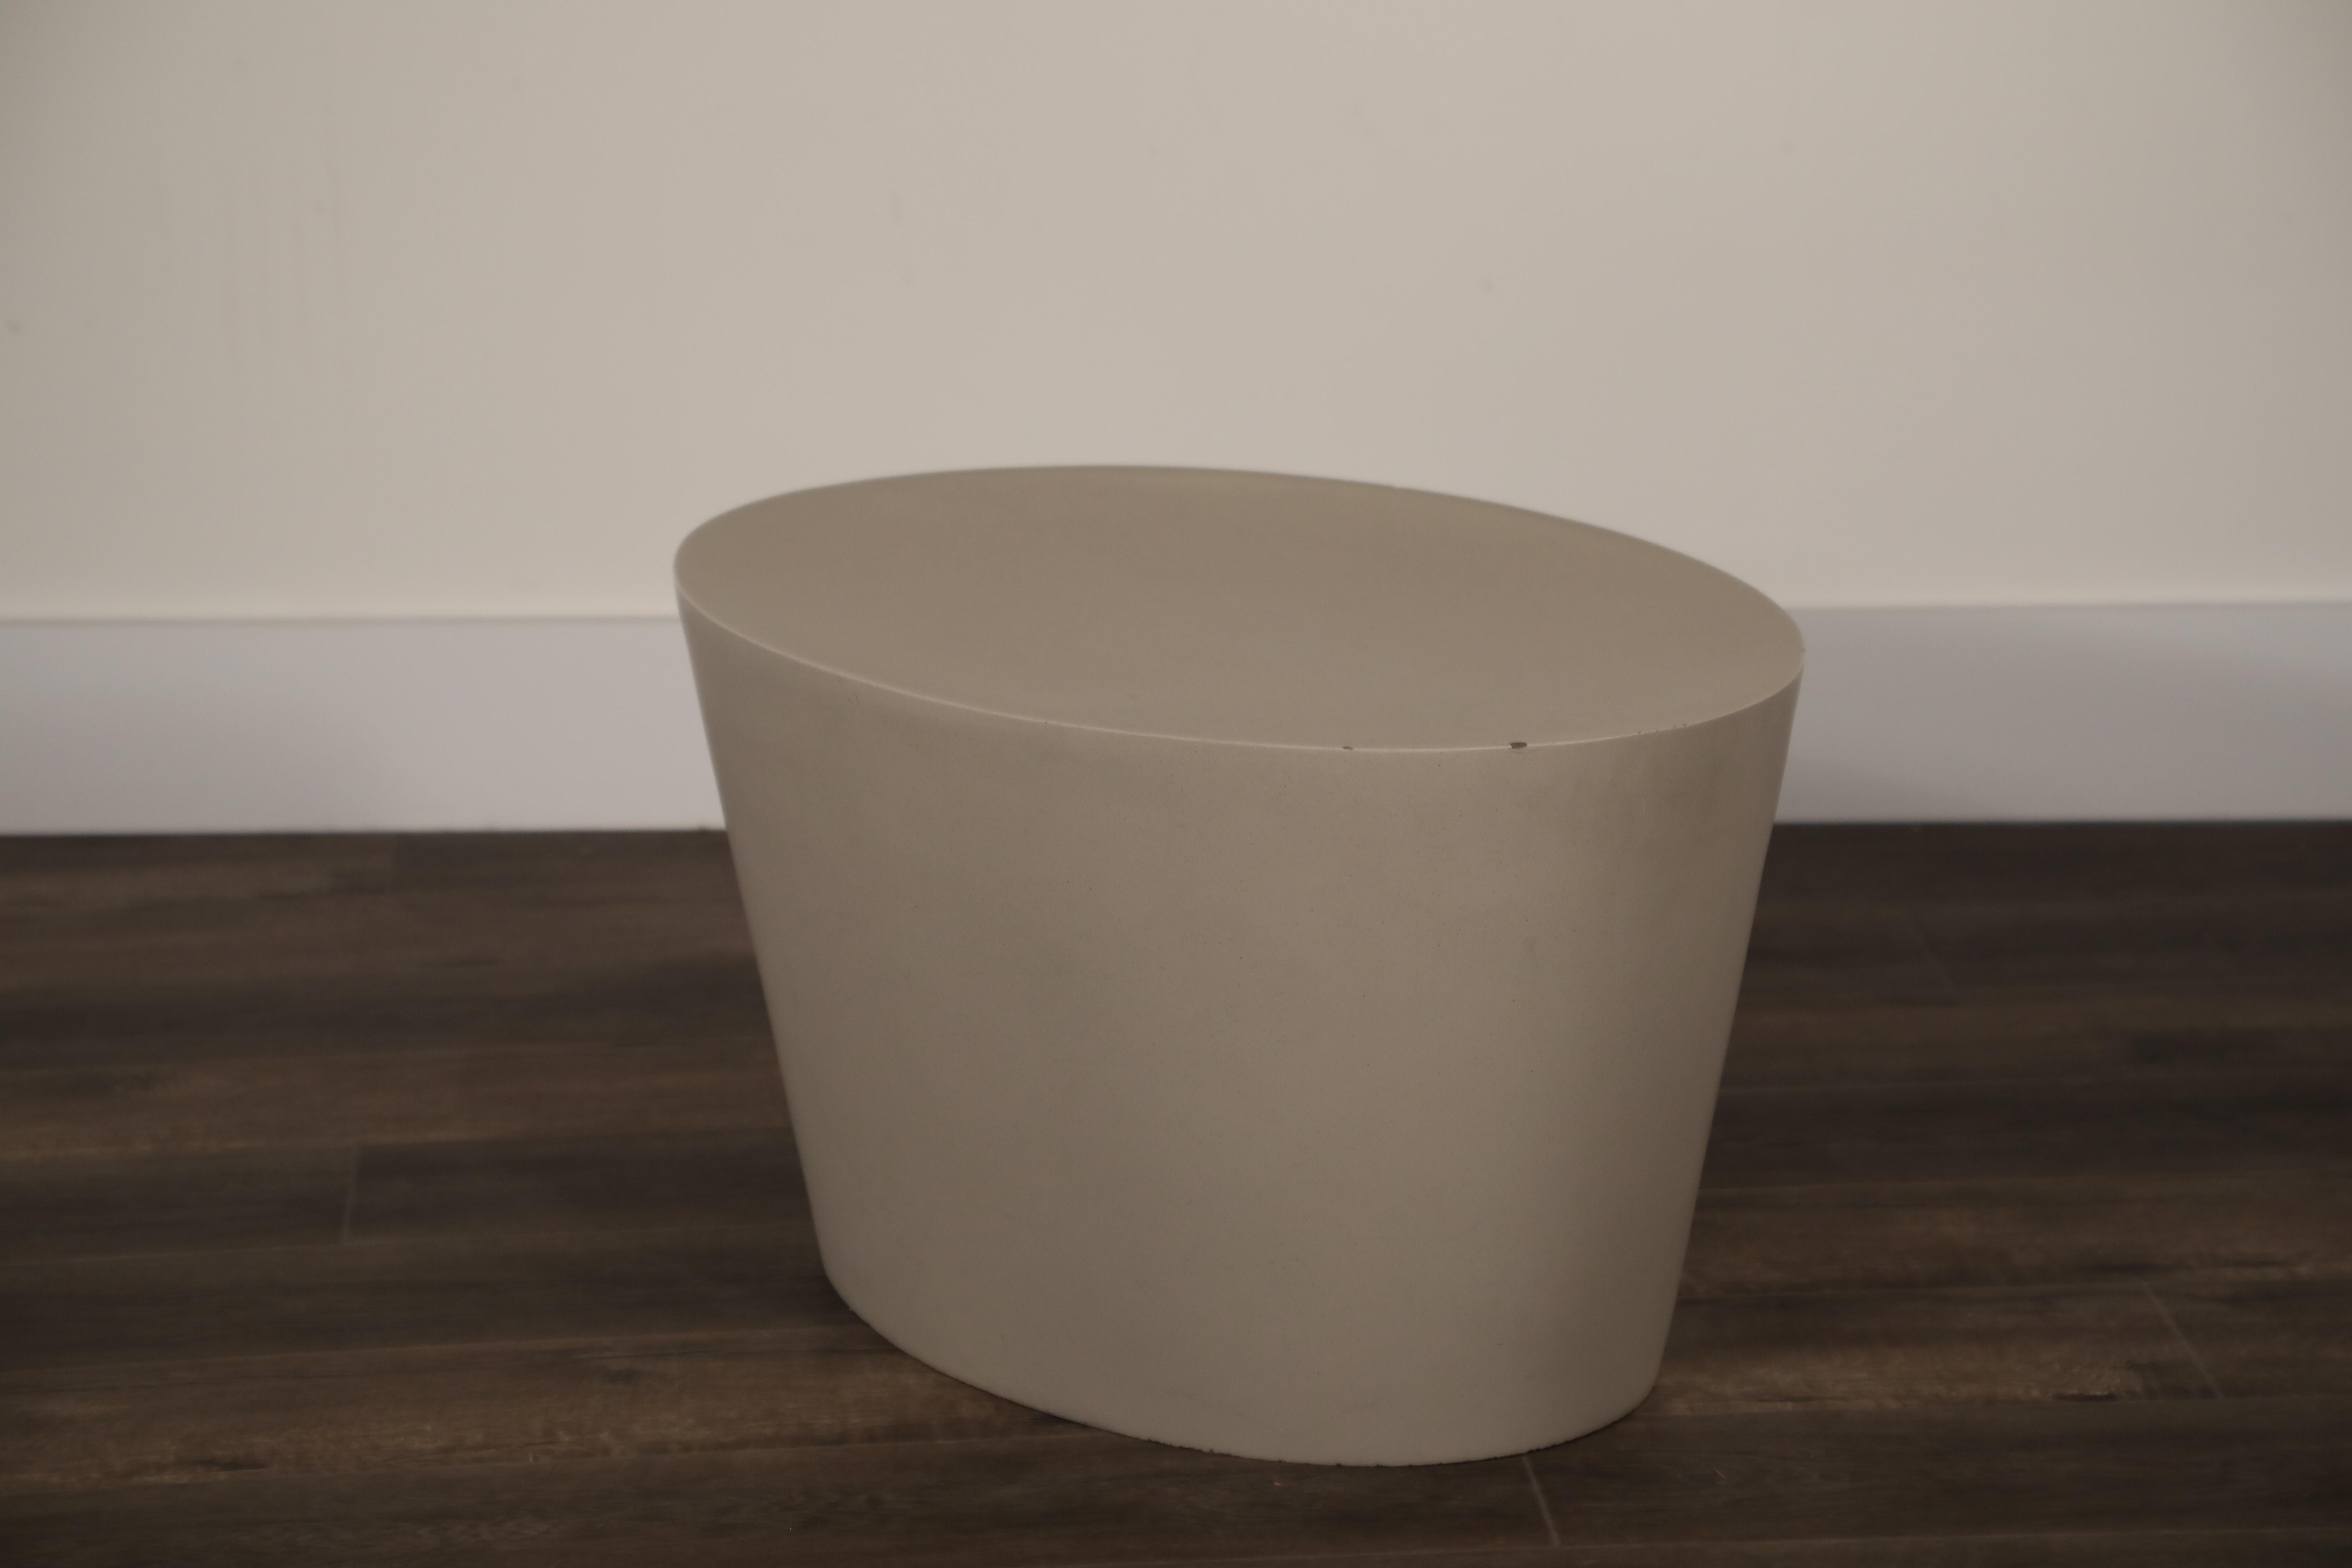 Maya Lin 1st-Generation Concrete Stool for Knoll Studio, Signed and Stamped 1998 5